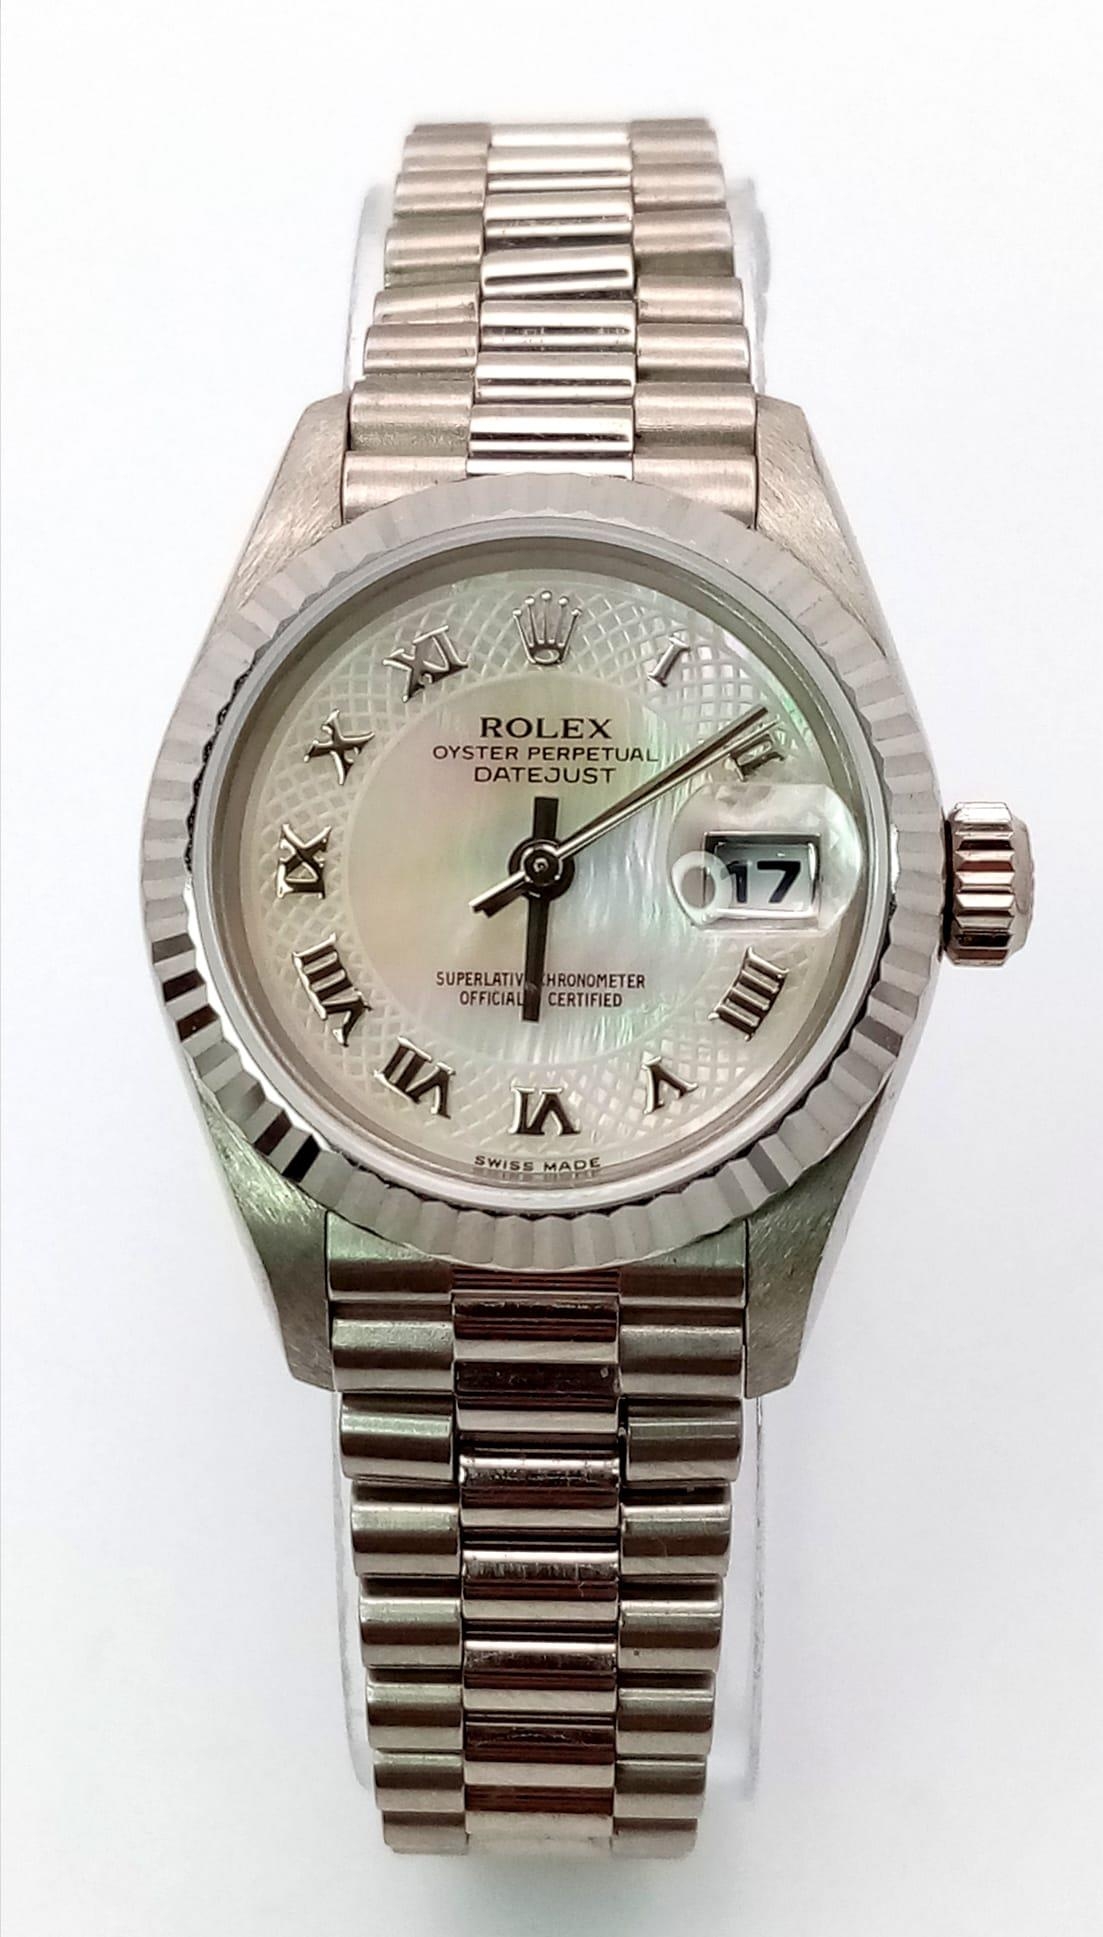 A LADIES ROLEX 18K WHITE GOLD OYSTER PERPETUAL DATEJUST WITH UNUSUAL PATTERNED DIAL , ROMAN NUMERALS - Image 2 of 9